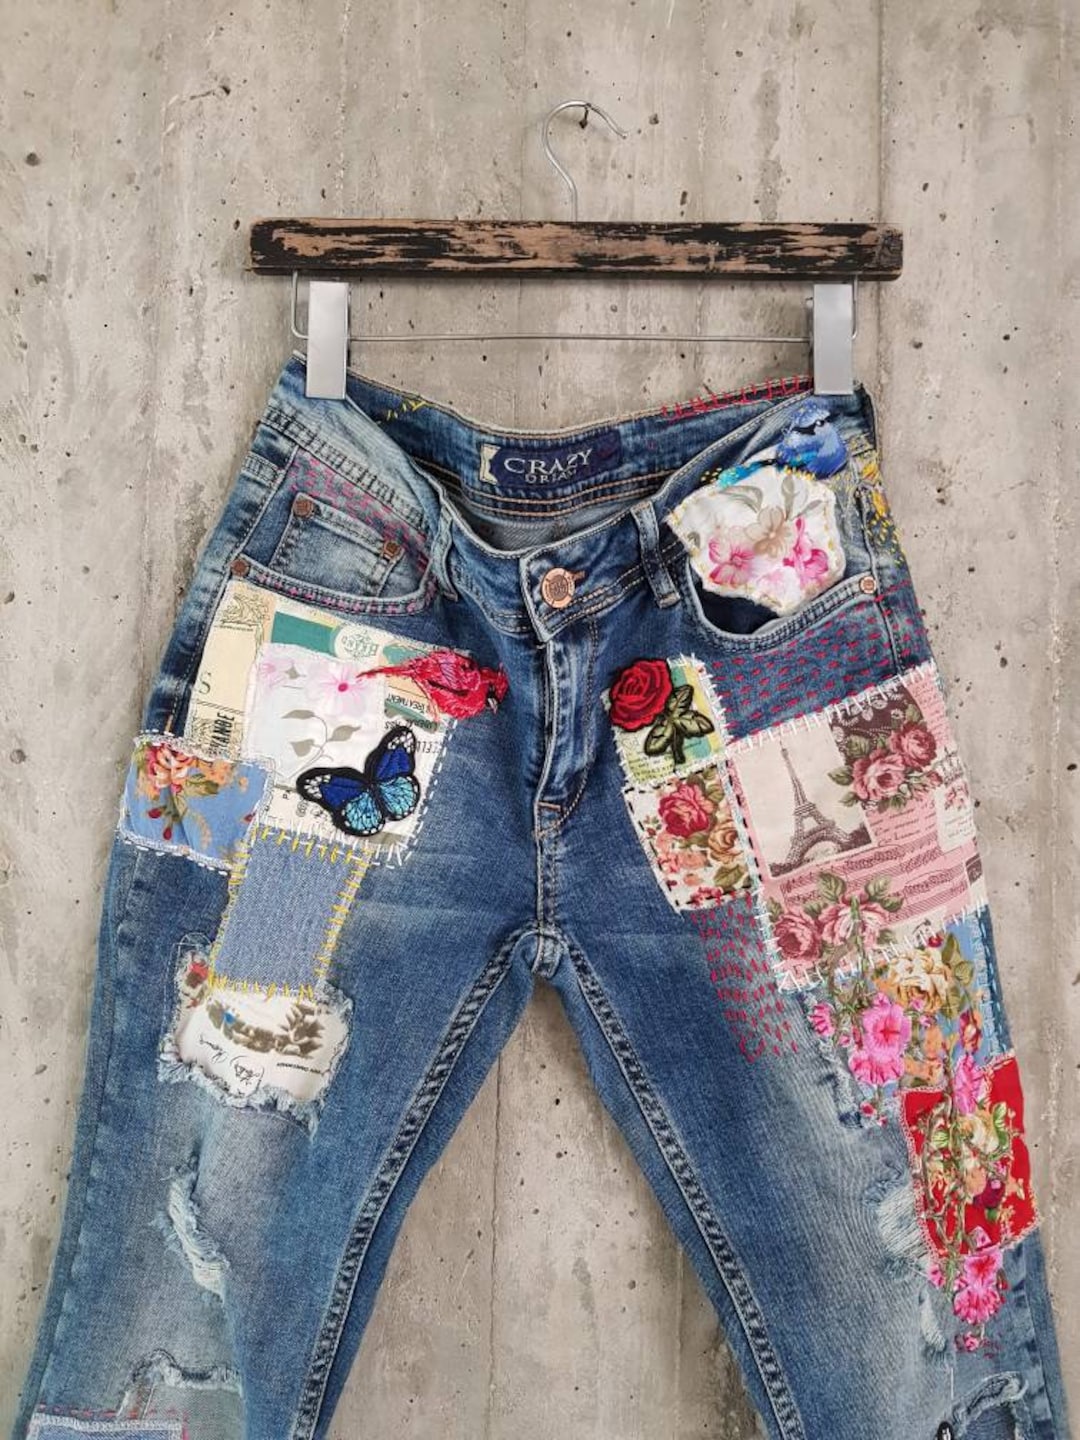 320 Patched & Embroidered Jeans ideas